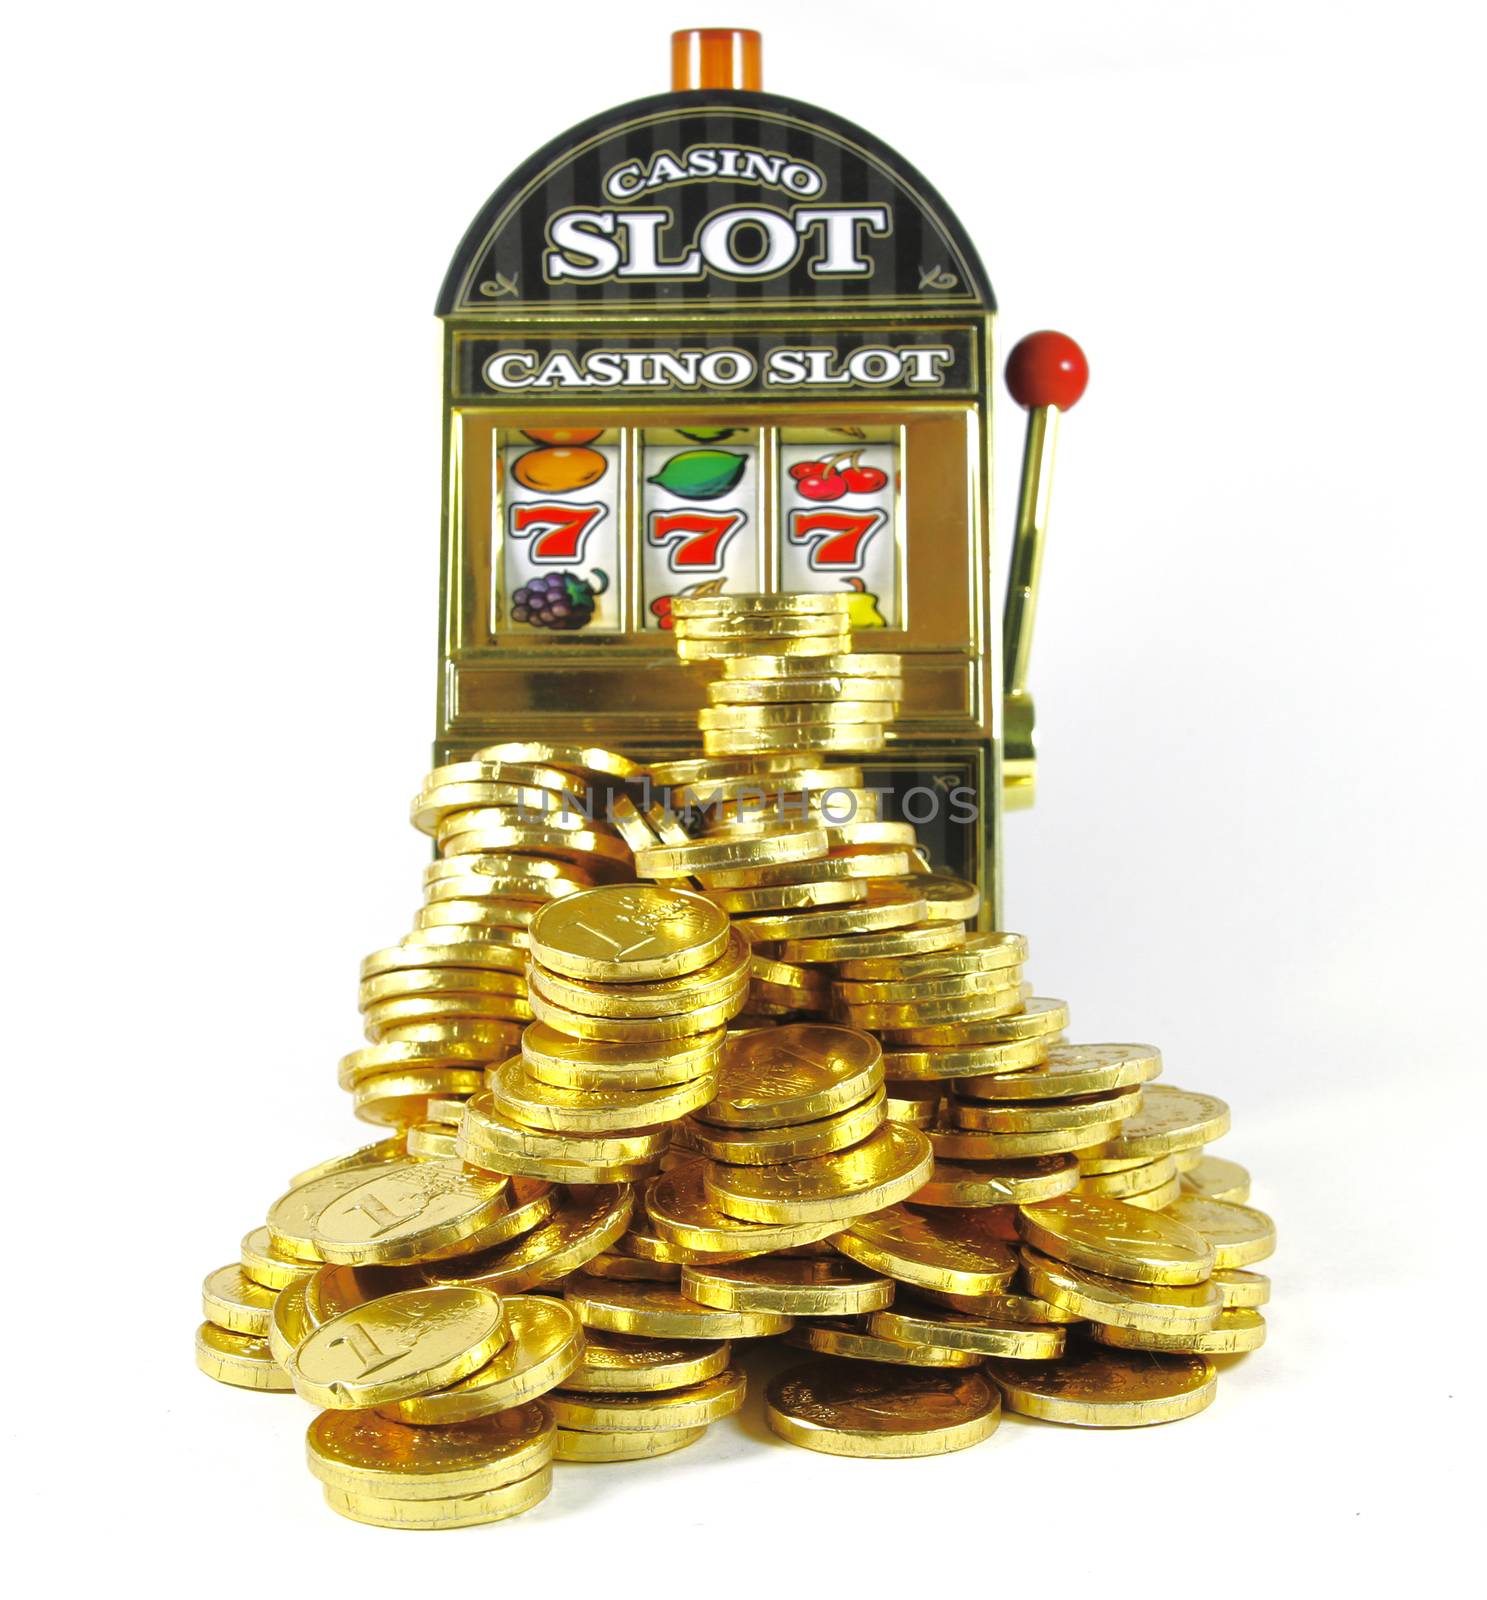 retro slot machine with 777 and lots of gold for winnings 